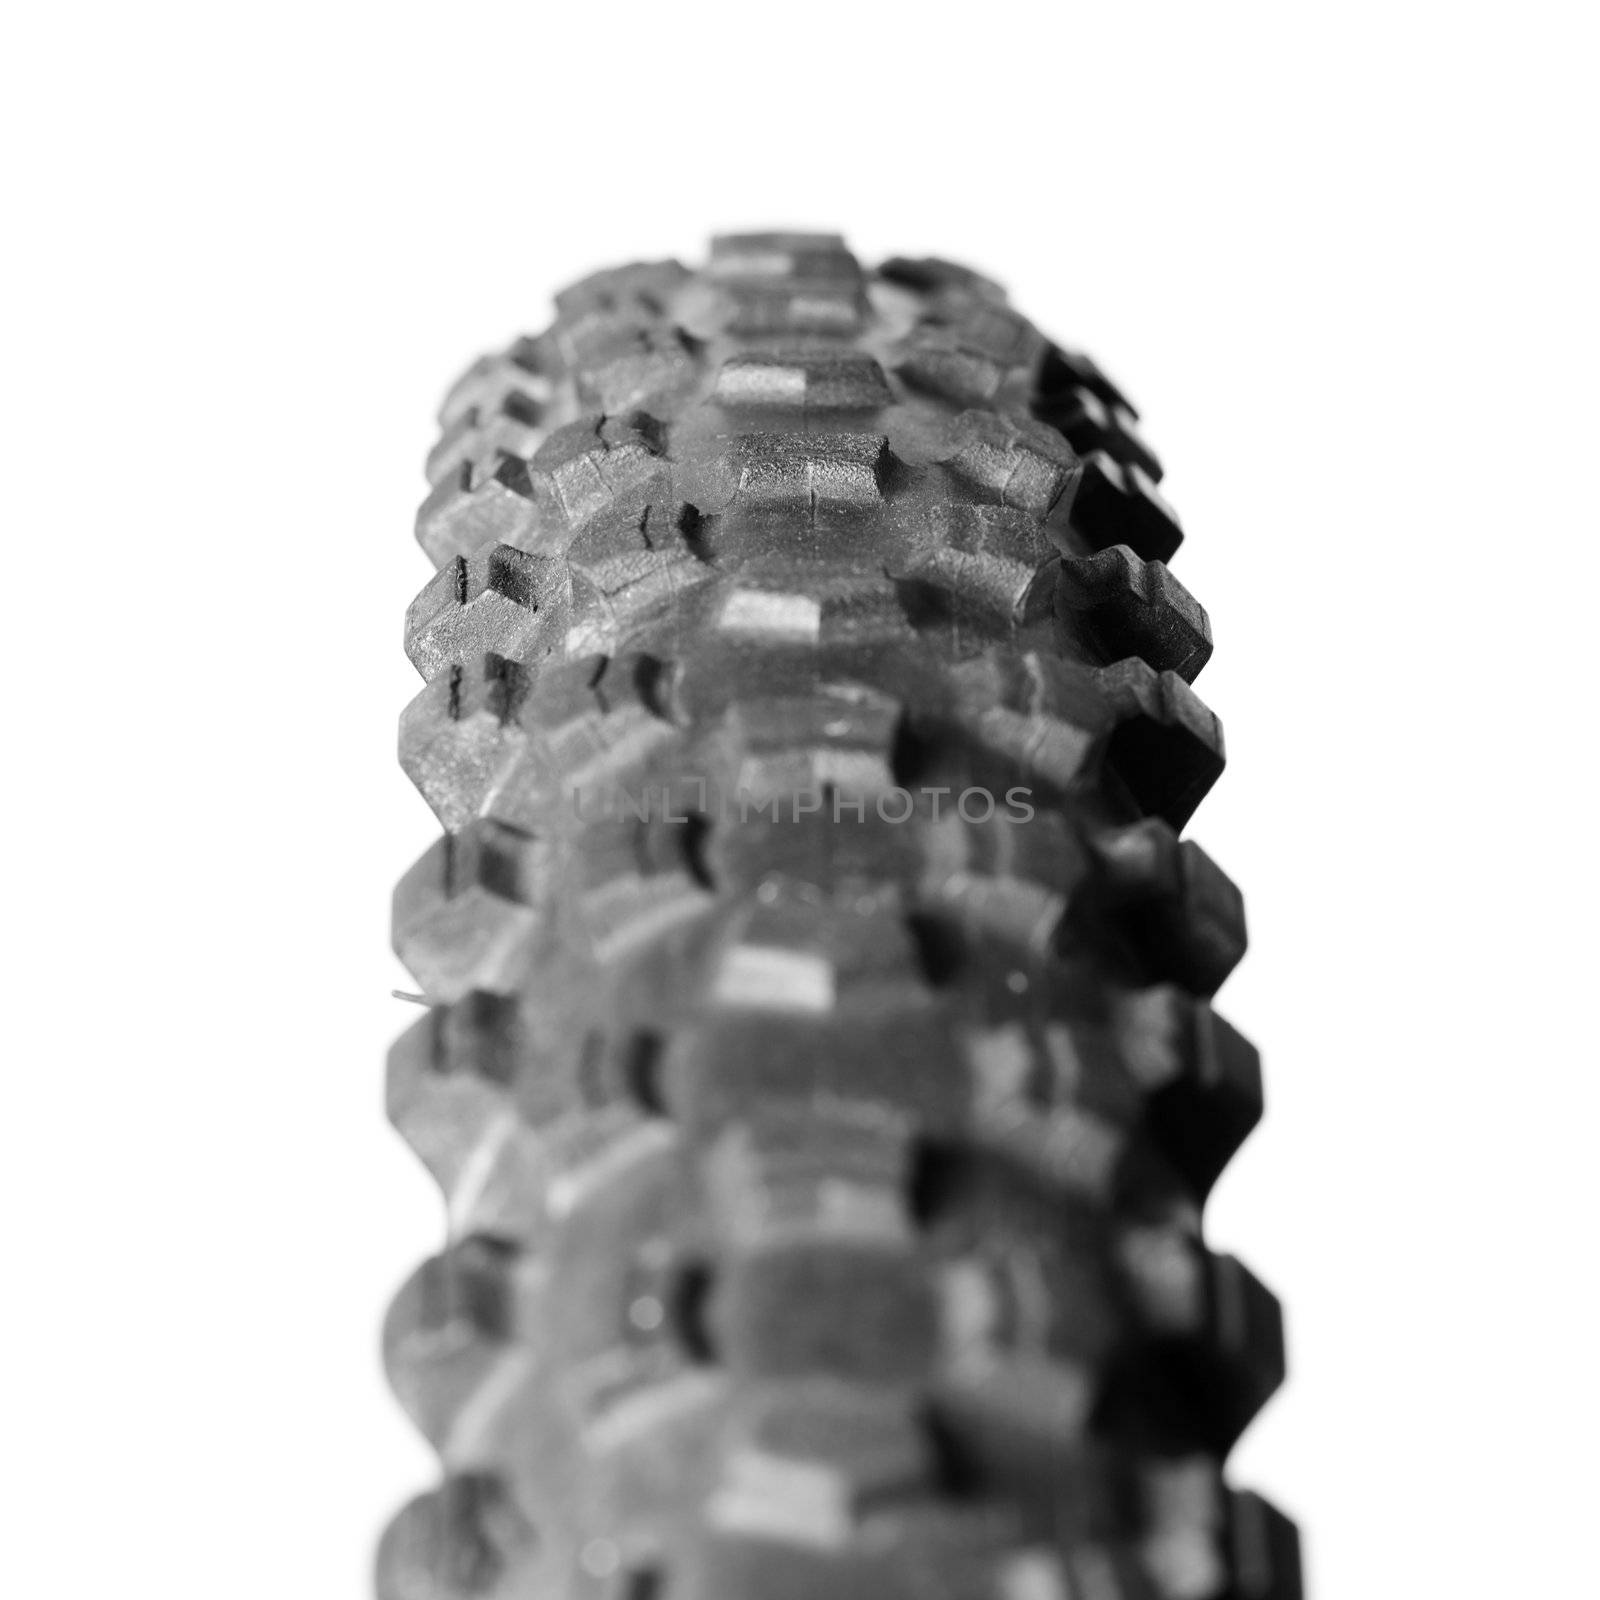 Bicycle tire by naumoid